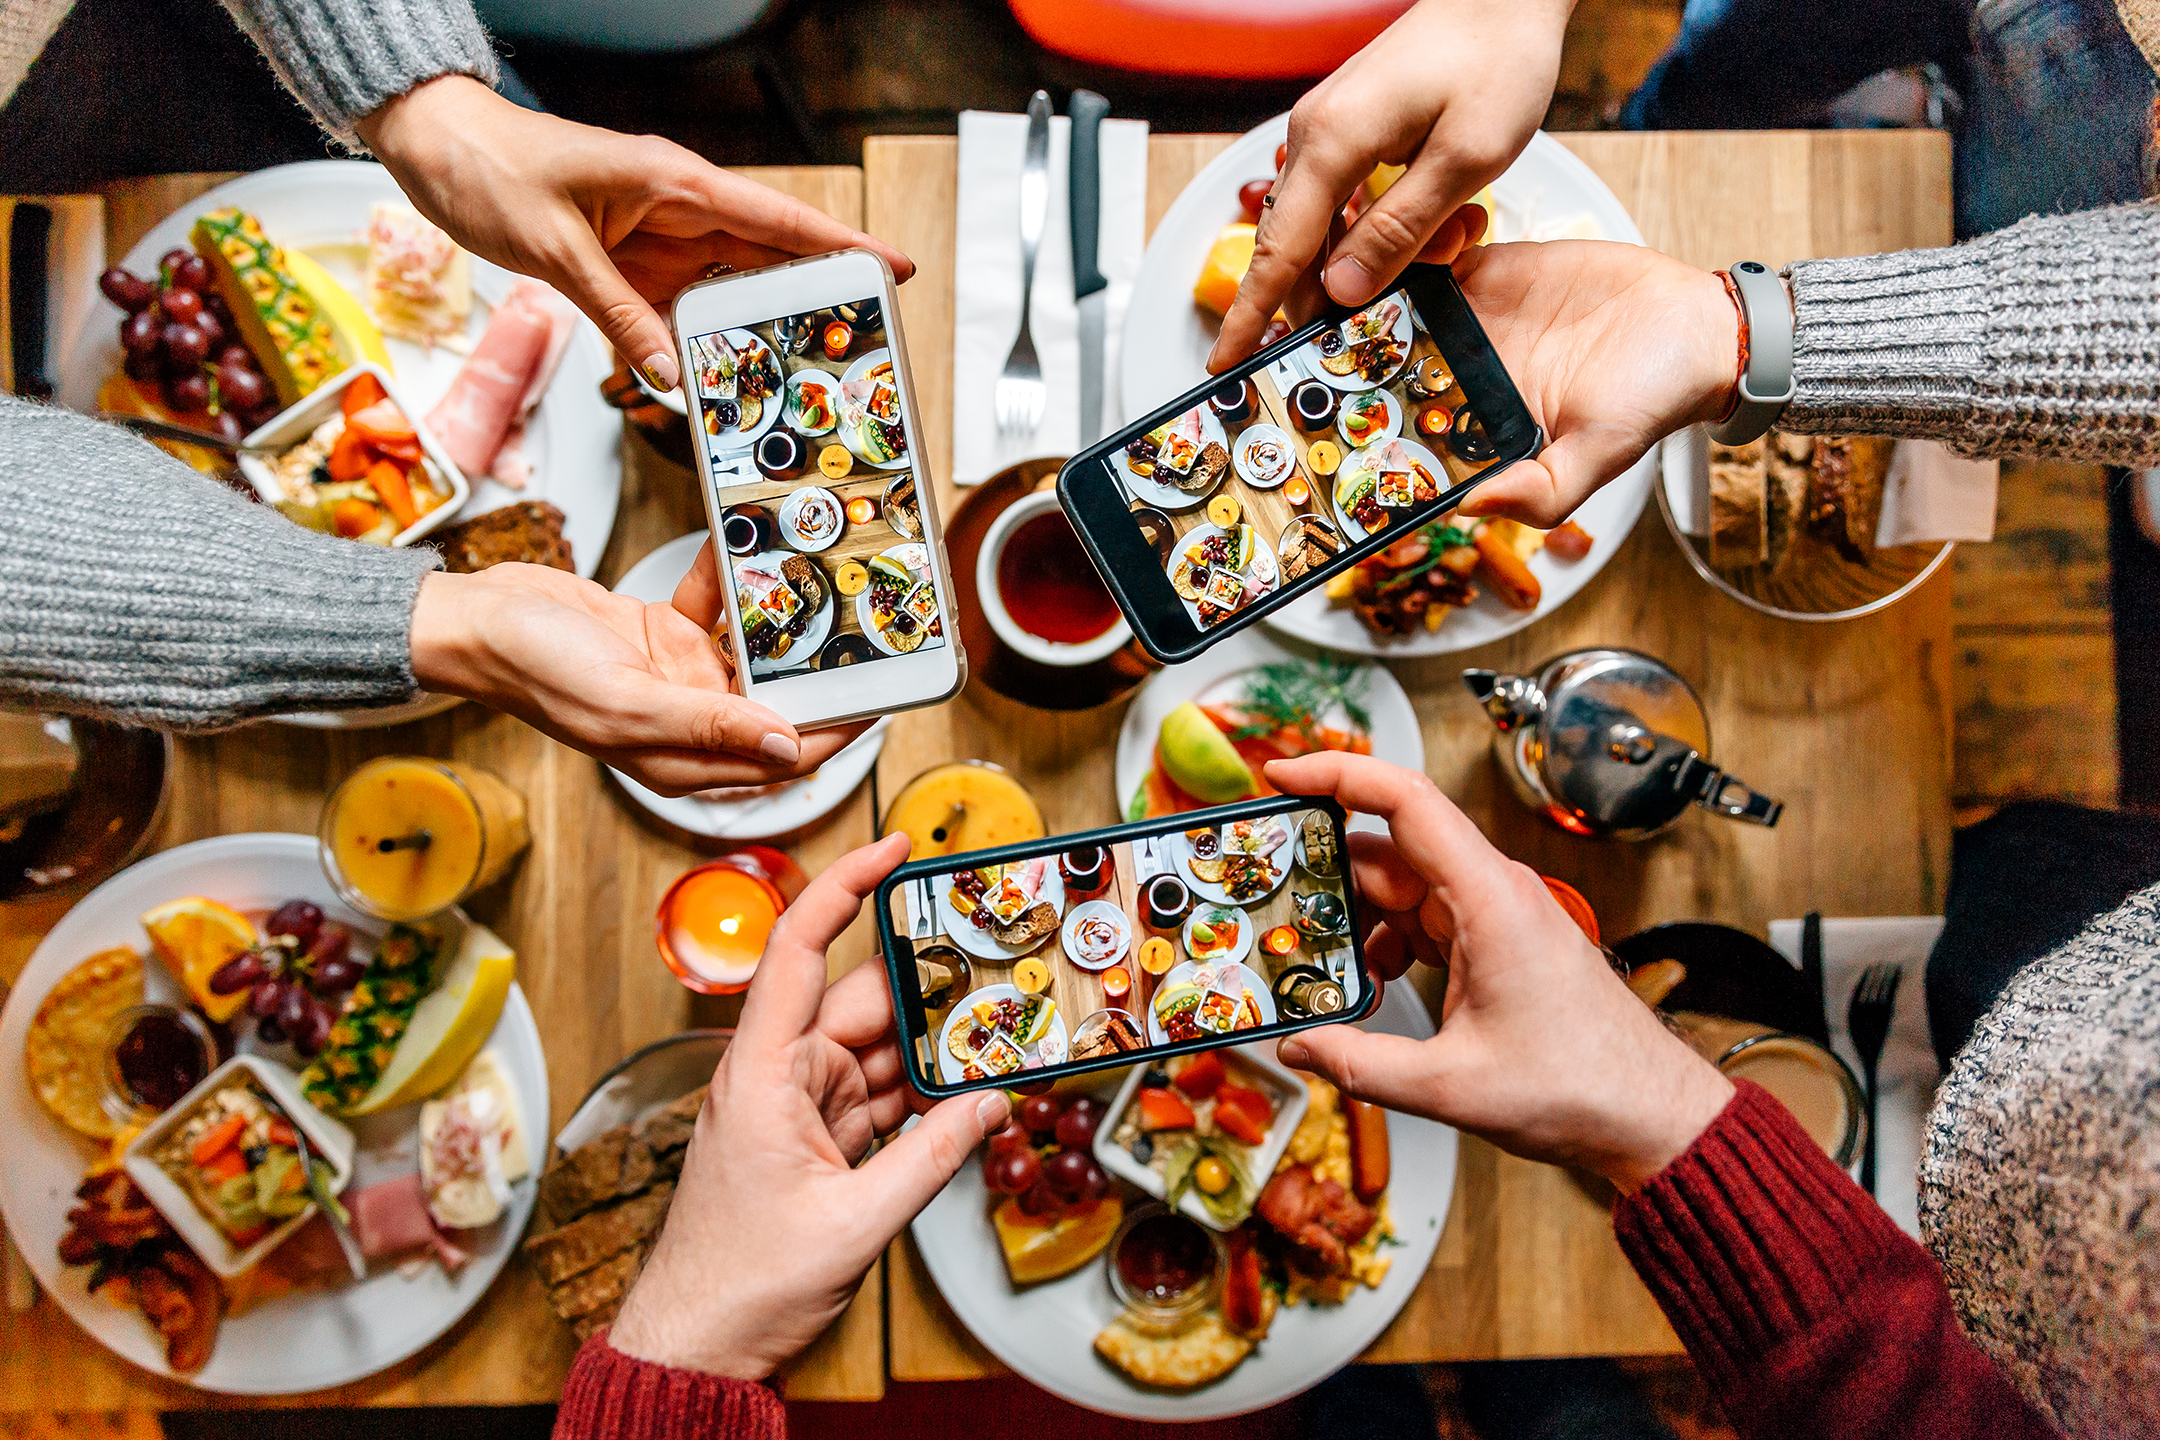 Friends taking pictures of food on the table with smartphones during brunch in restaurant 